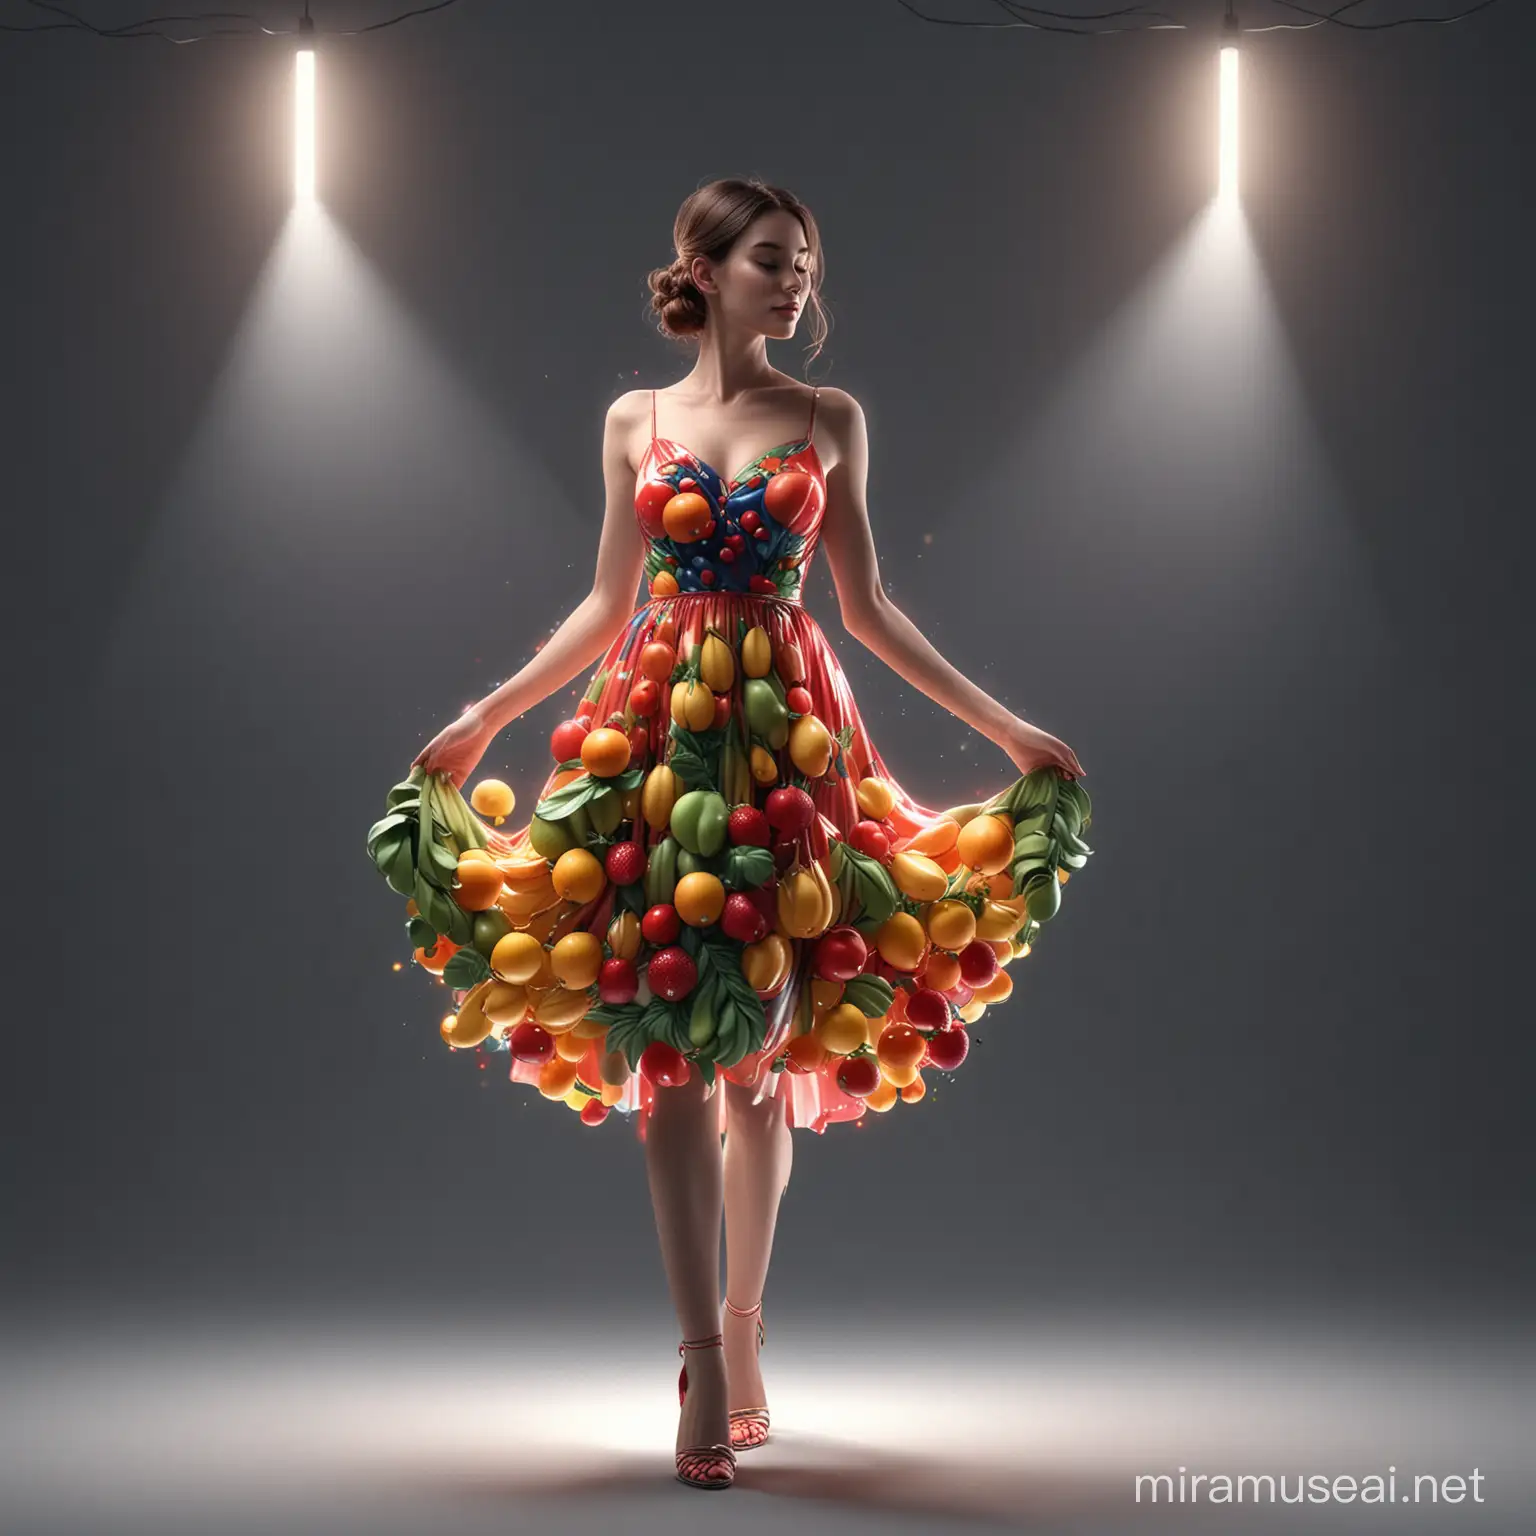 3D 8k minimal realstic illustrator minimal woman wearing fruits dress shinning and lighting like magical thing at the midnight